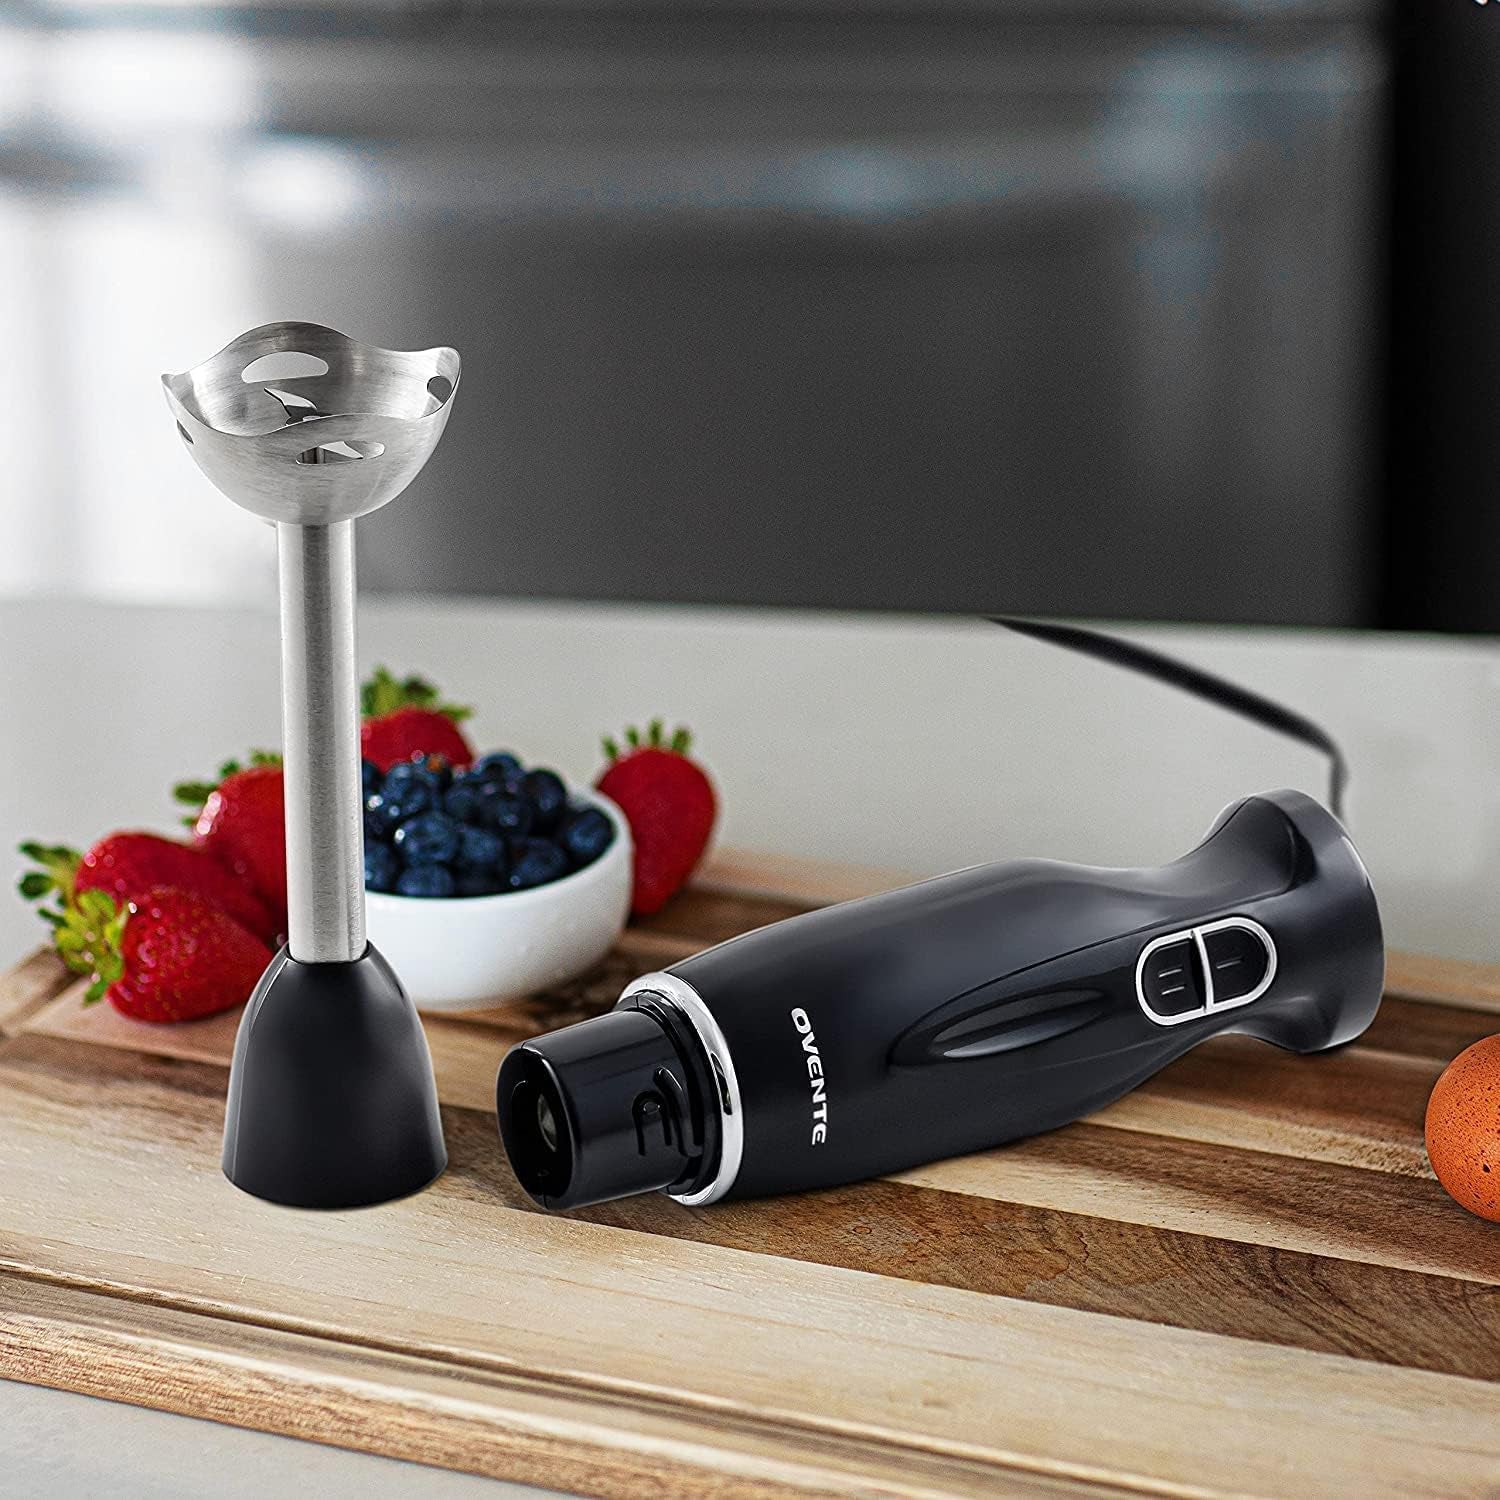 Electric Immersion Hand Blender 300 Watt 2 Mixing Speed with Stainless Steel Blades, Powerful Portable Easy Control Grip Stick Mixer Perfect for Smoothies, Puree Baby Food & Soup, Black HS560B